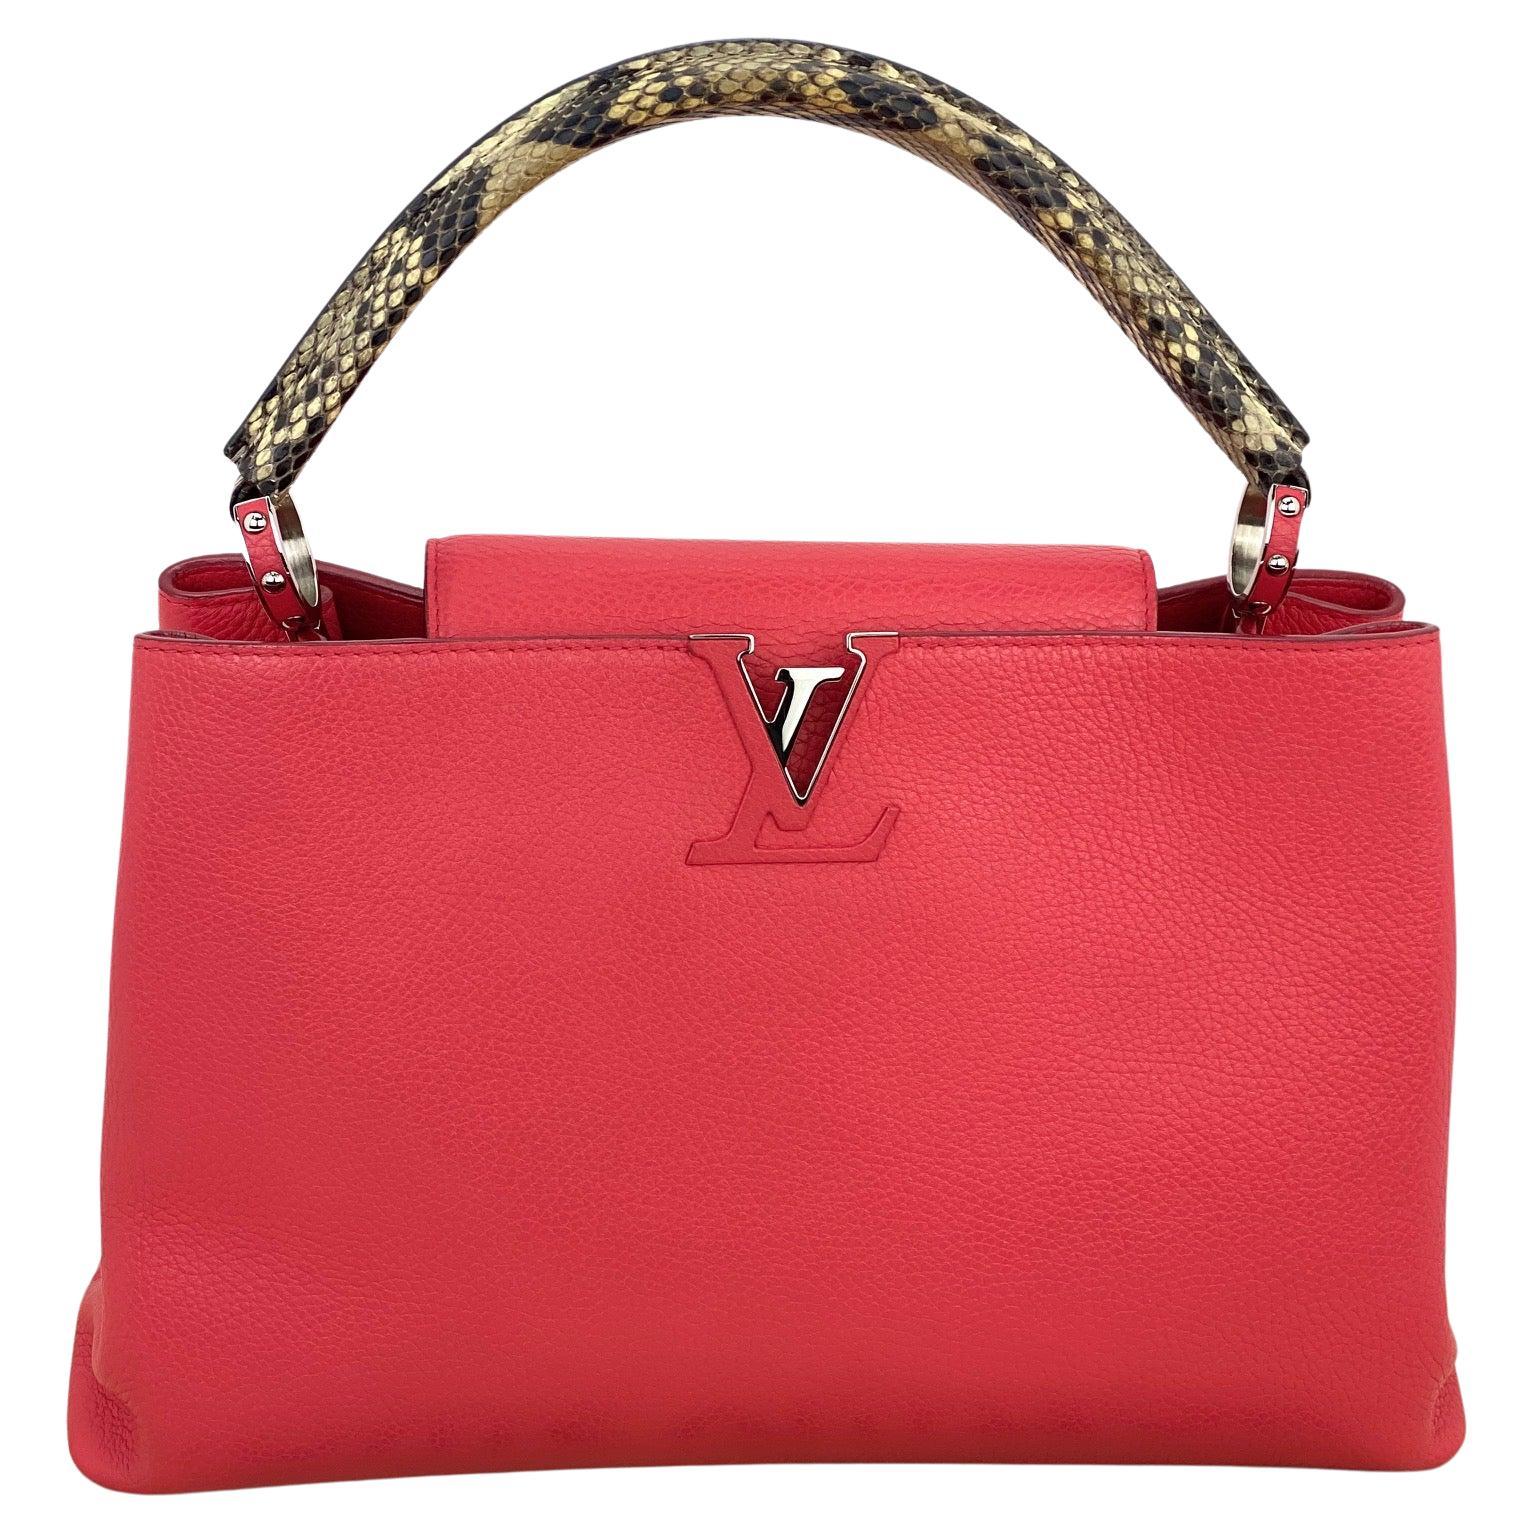 LOUIS VUITTON Capucines MM Python Rubis Red Taurillon Leather Hand Shoulder Bag